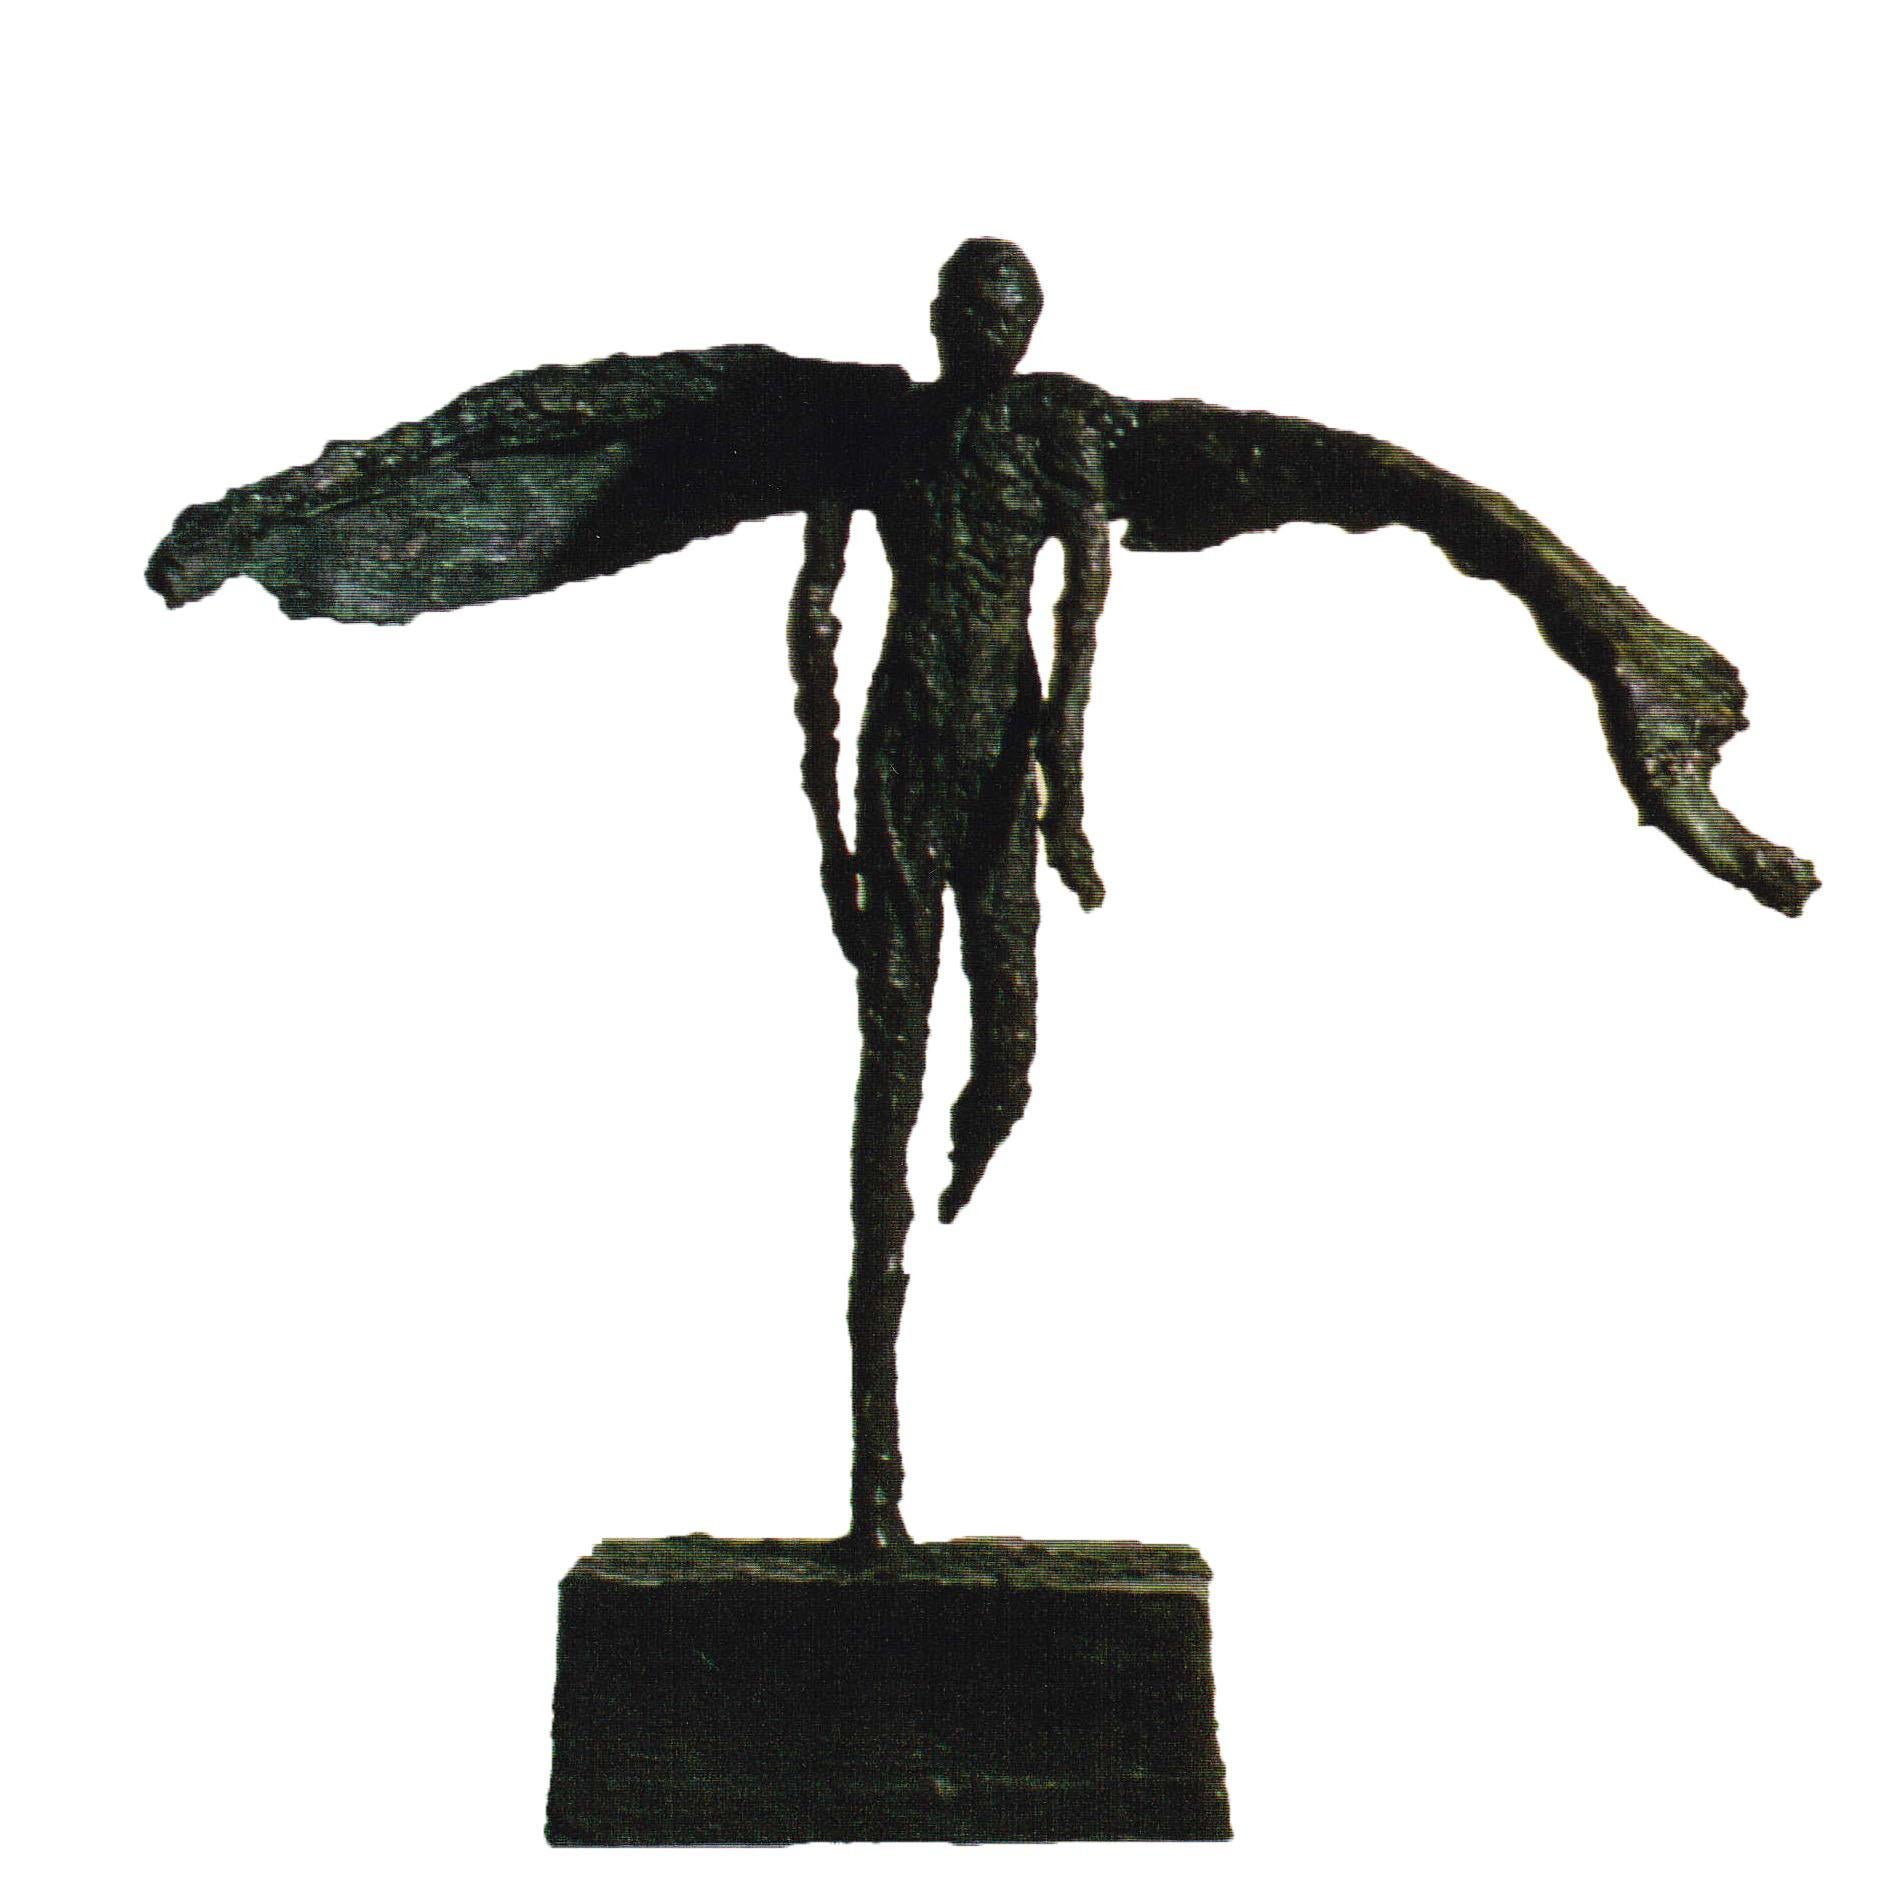 Artist: Emmanuel Okoro
Dimensions (HxWxD):  37 × 33 × 20 cm
Materials: Bronze Resin Sculpture
Edition: 5 of 12
Signed on back
Figurative sculpture of Angel / Man with wings 
Okoro pares down to reveal the essence of a state of being, oneness and